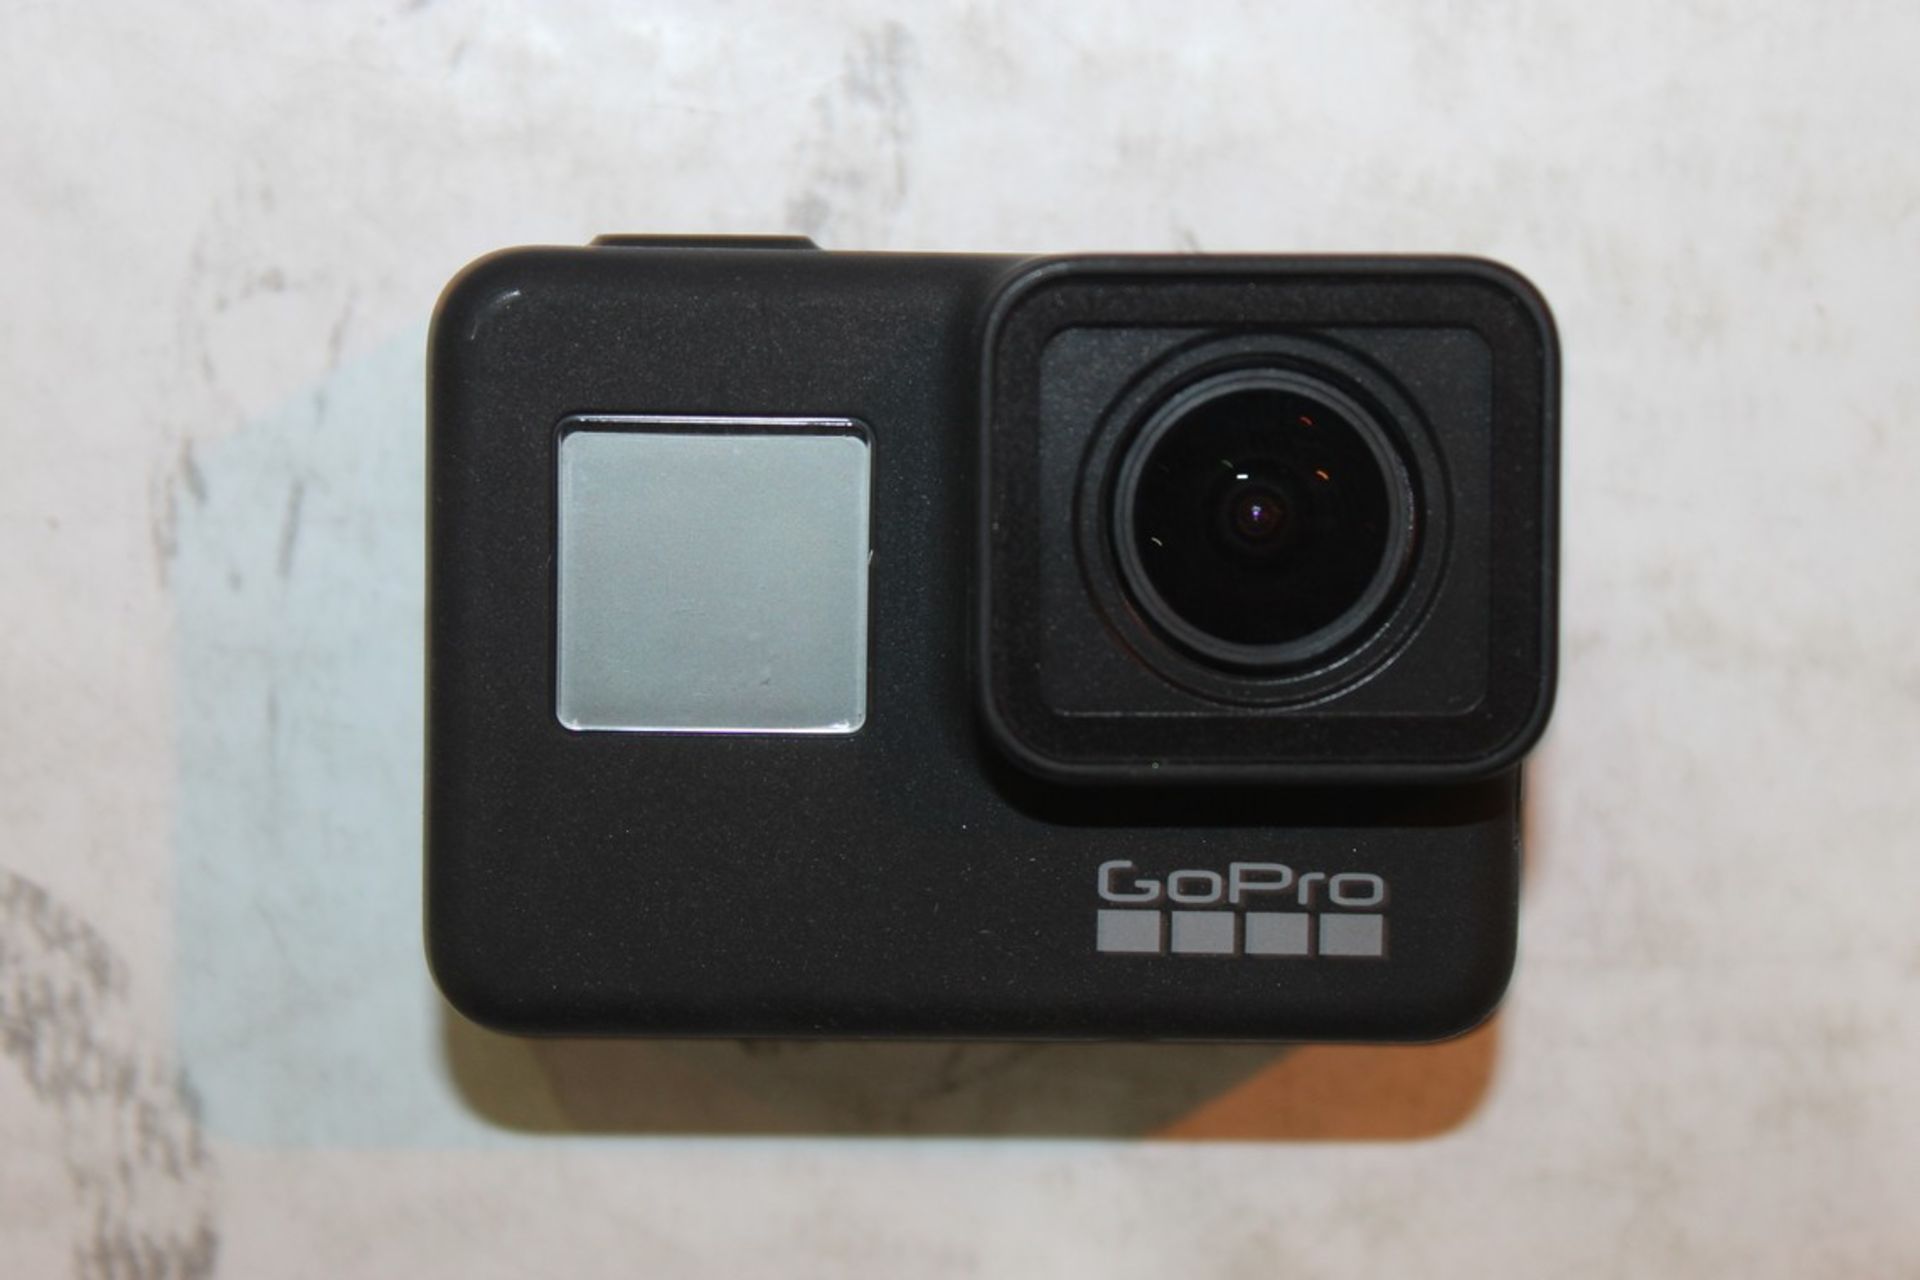 Unboxed Gopro Camera Only (No accessories or Box) RRP £220 (Pictures are for Illustration Purposes